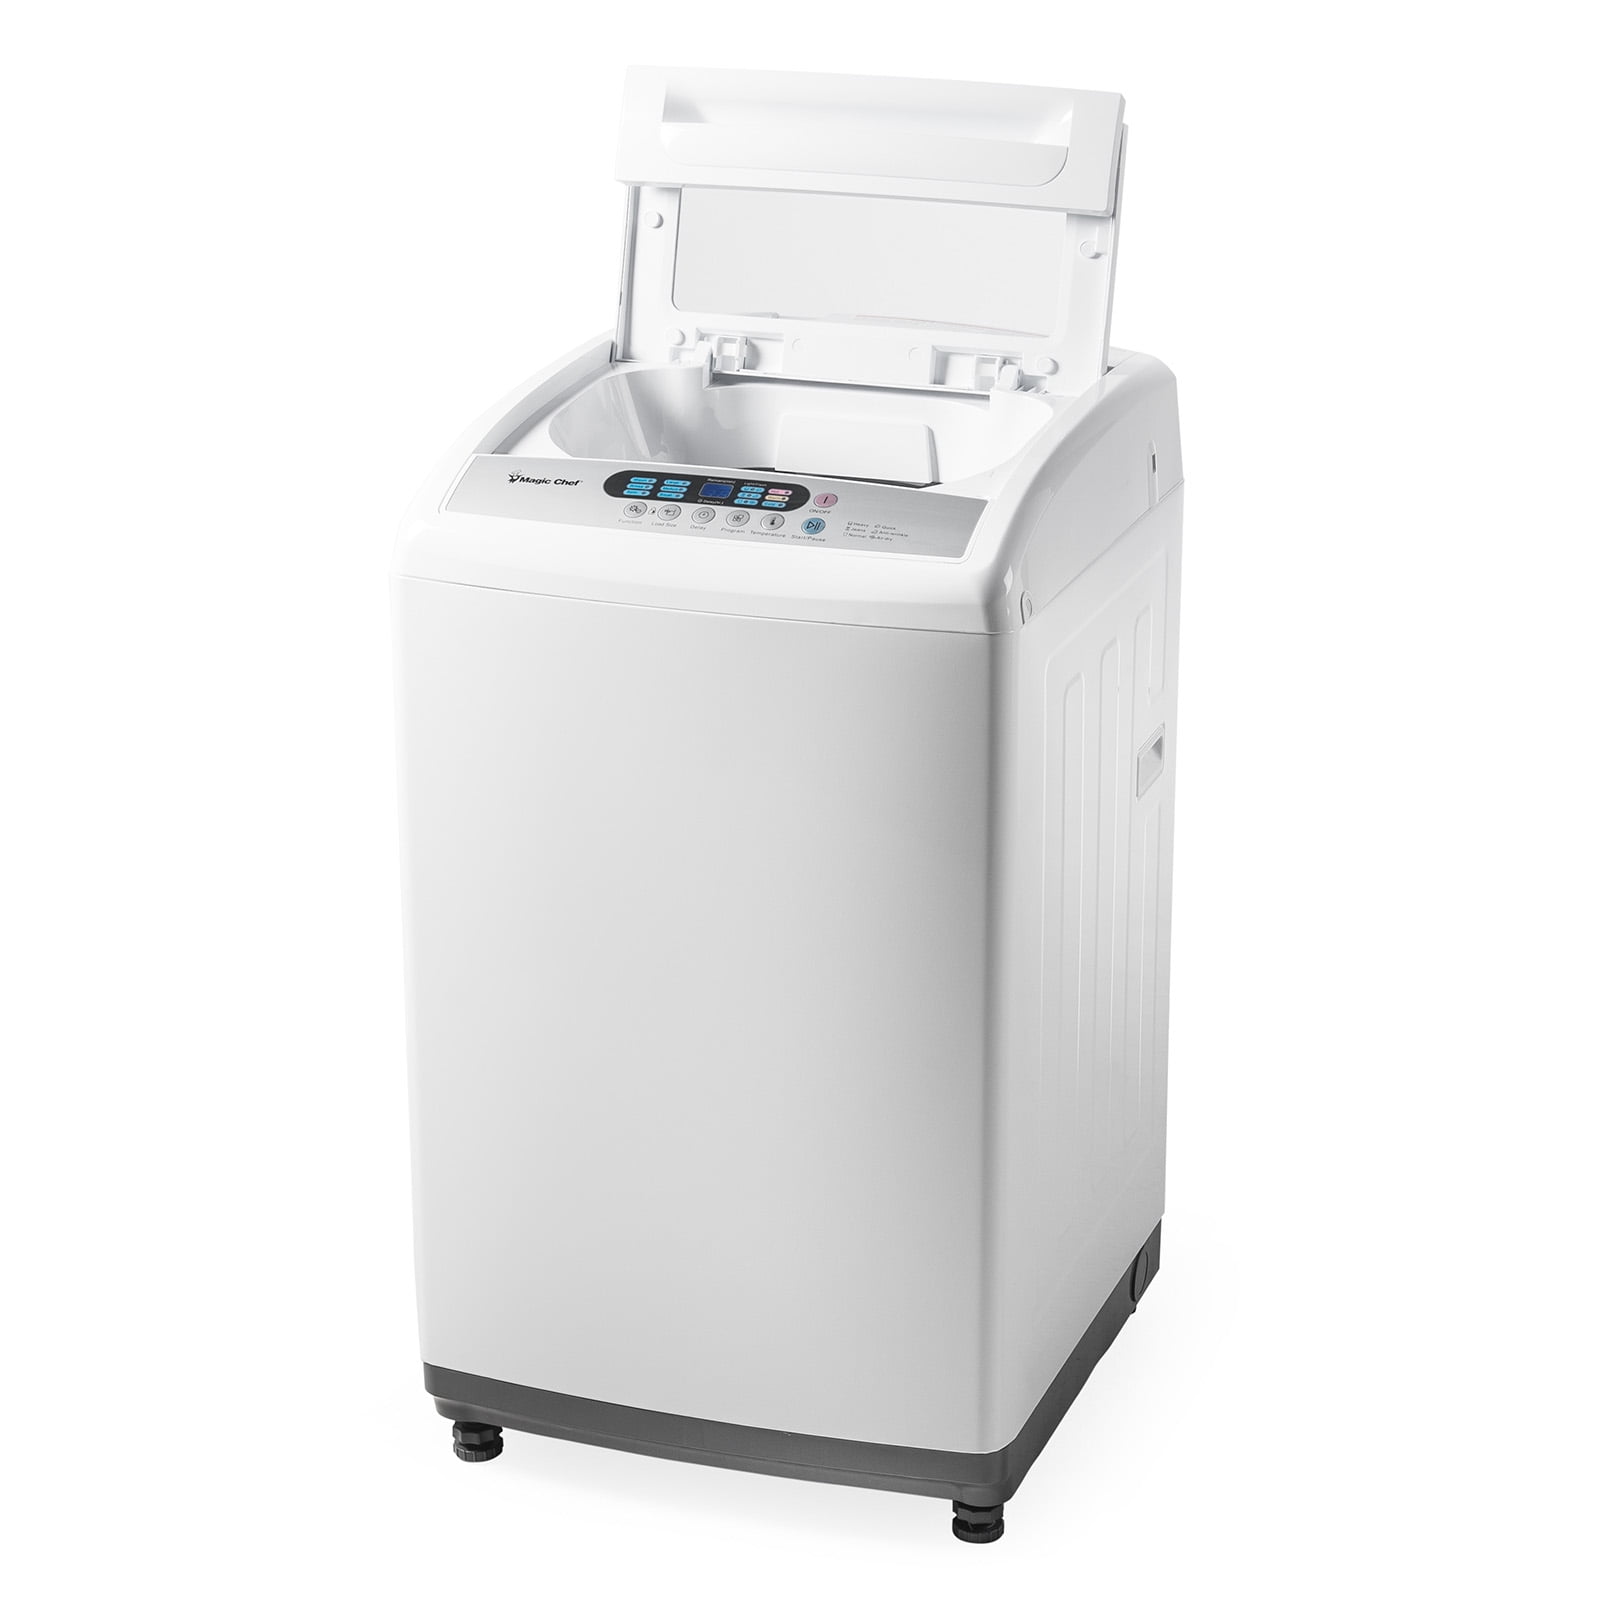 Magic Chef 0.9 cu. ft. Compact Portable Top Load Washer in White MCSTCW09W2  - The Home Depot